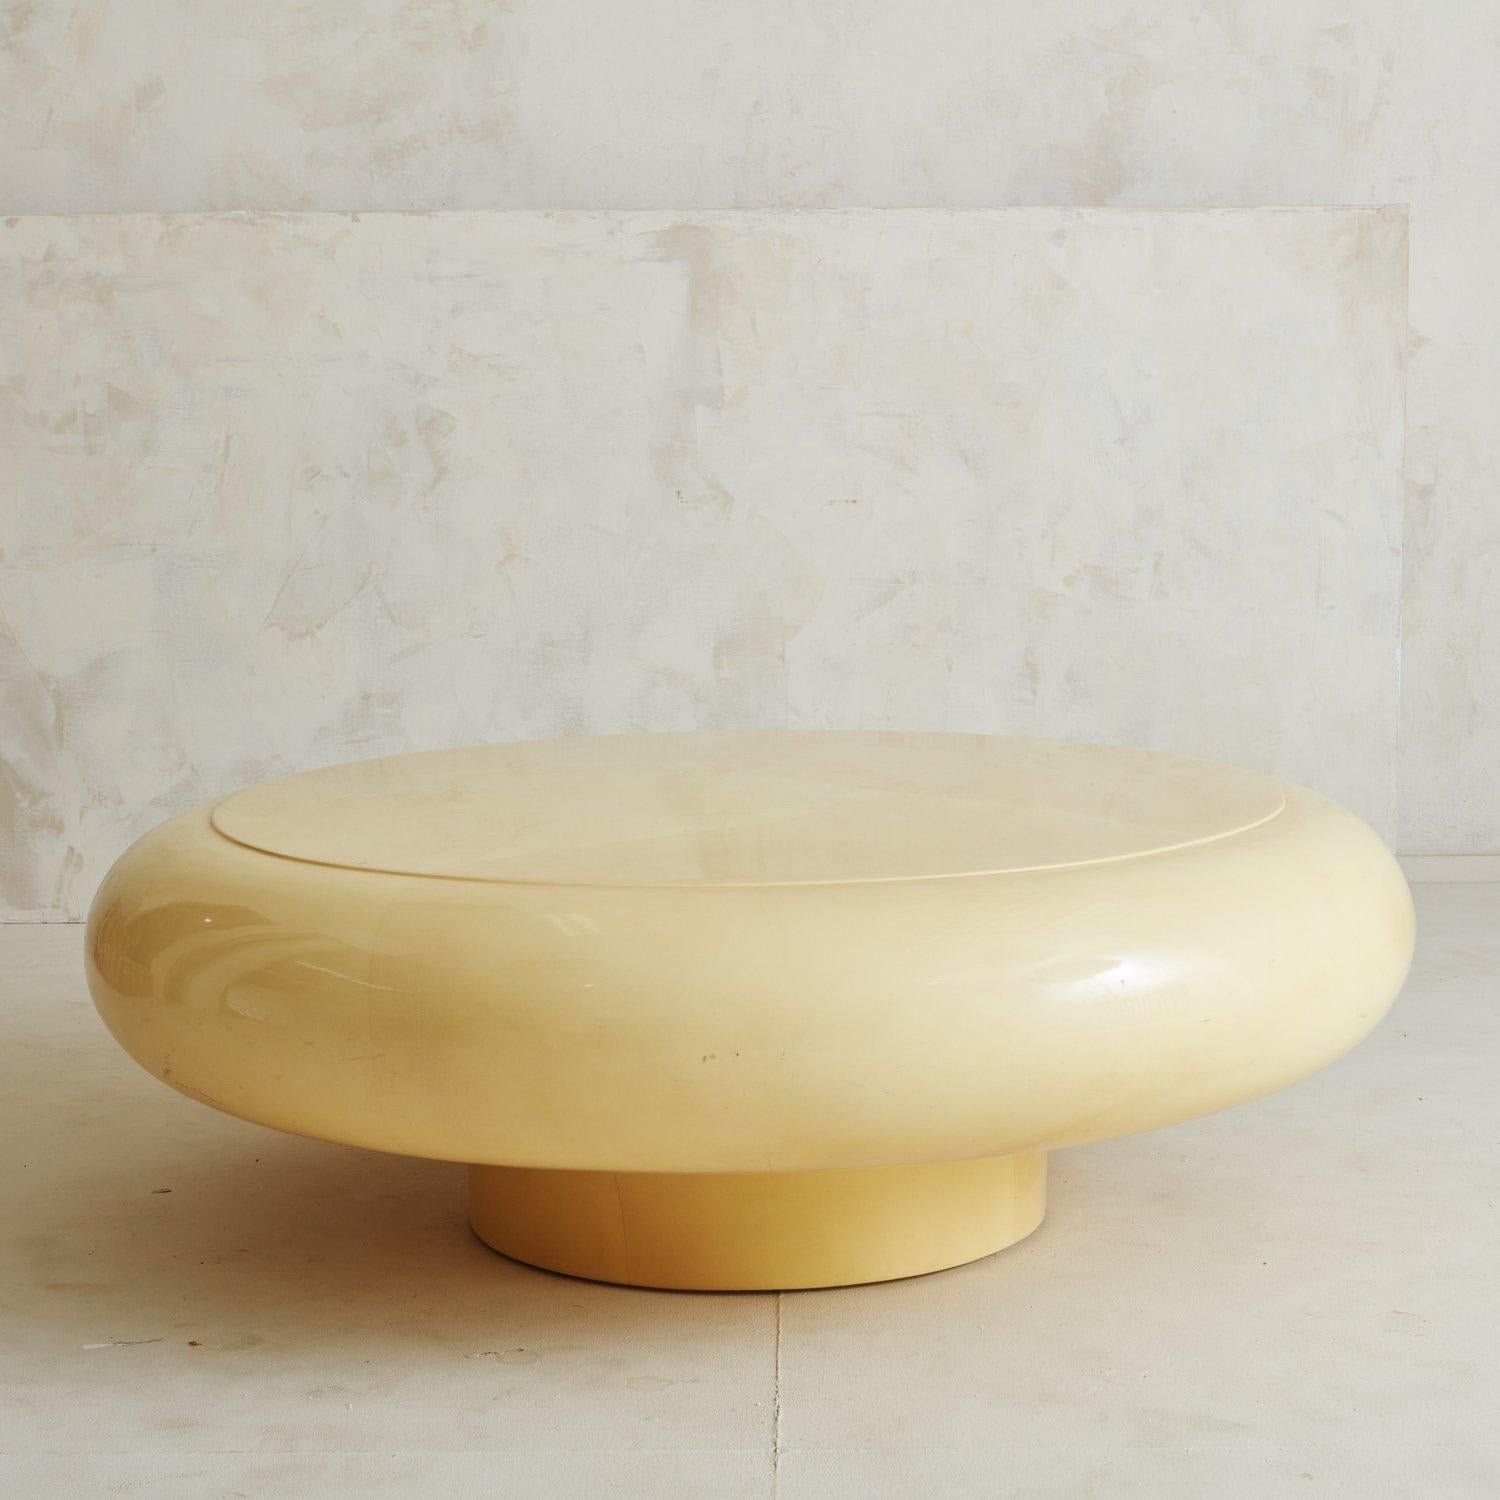 A custom mid-century round coffee table in a faux parchment lacquer finish. This sculptural table has a fabulous thick round top on a curved pedestal base. Sourced from the original owner.